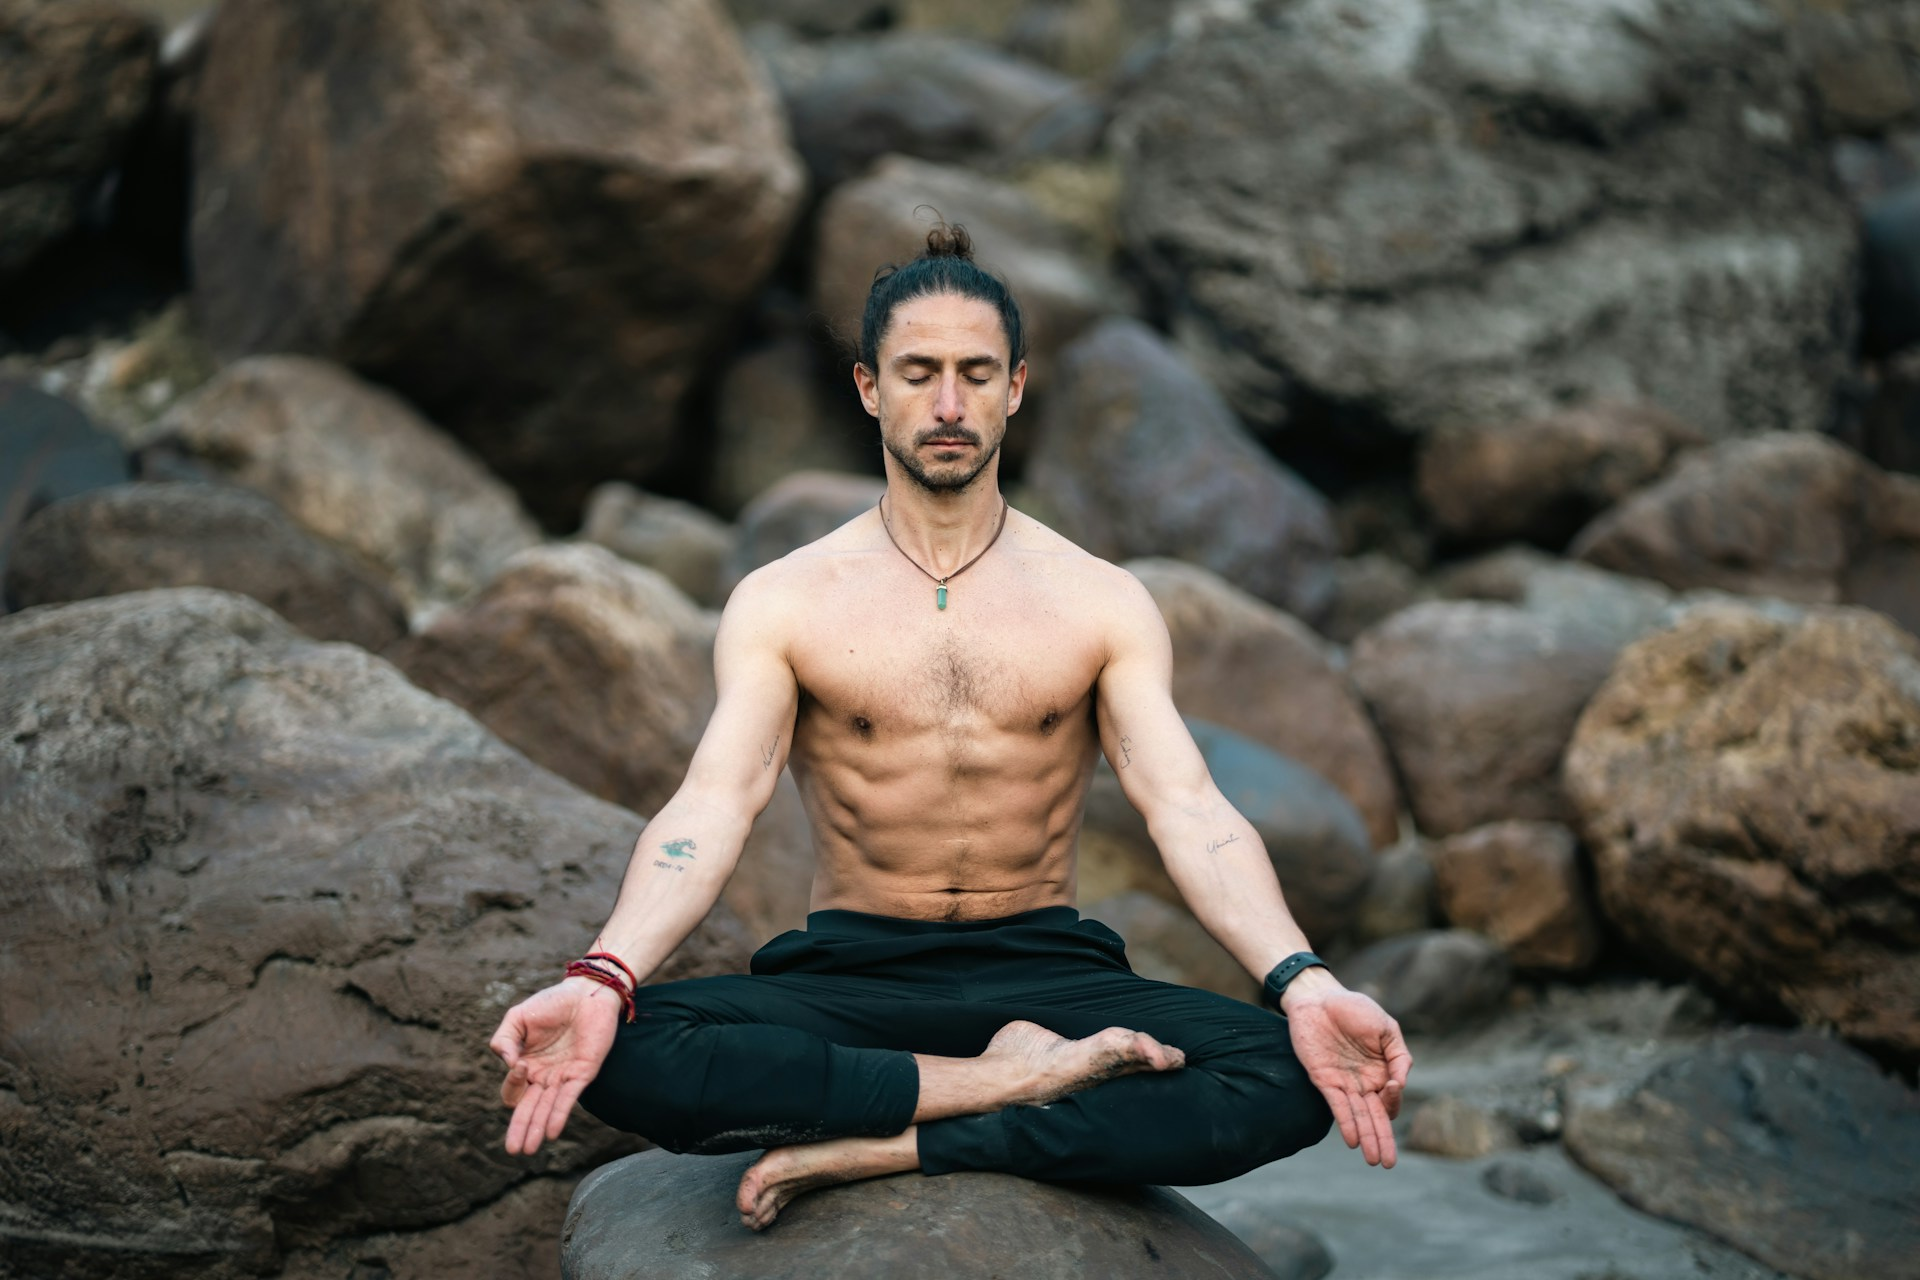 A man meditating on some rocks outside with his shirt off